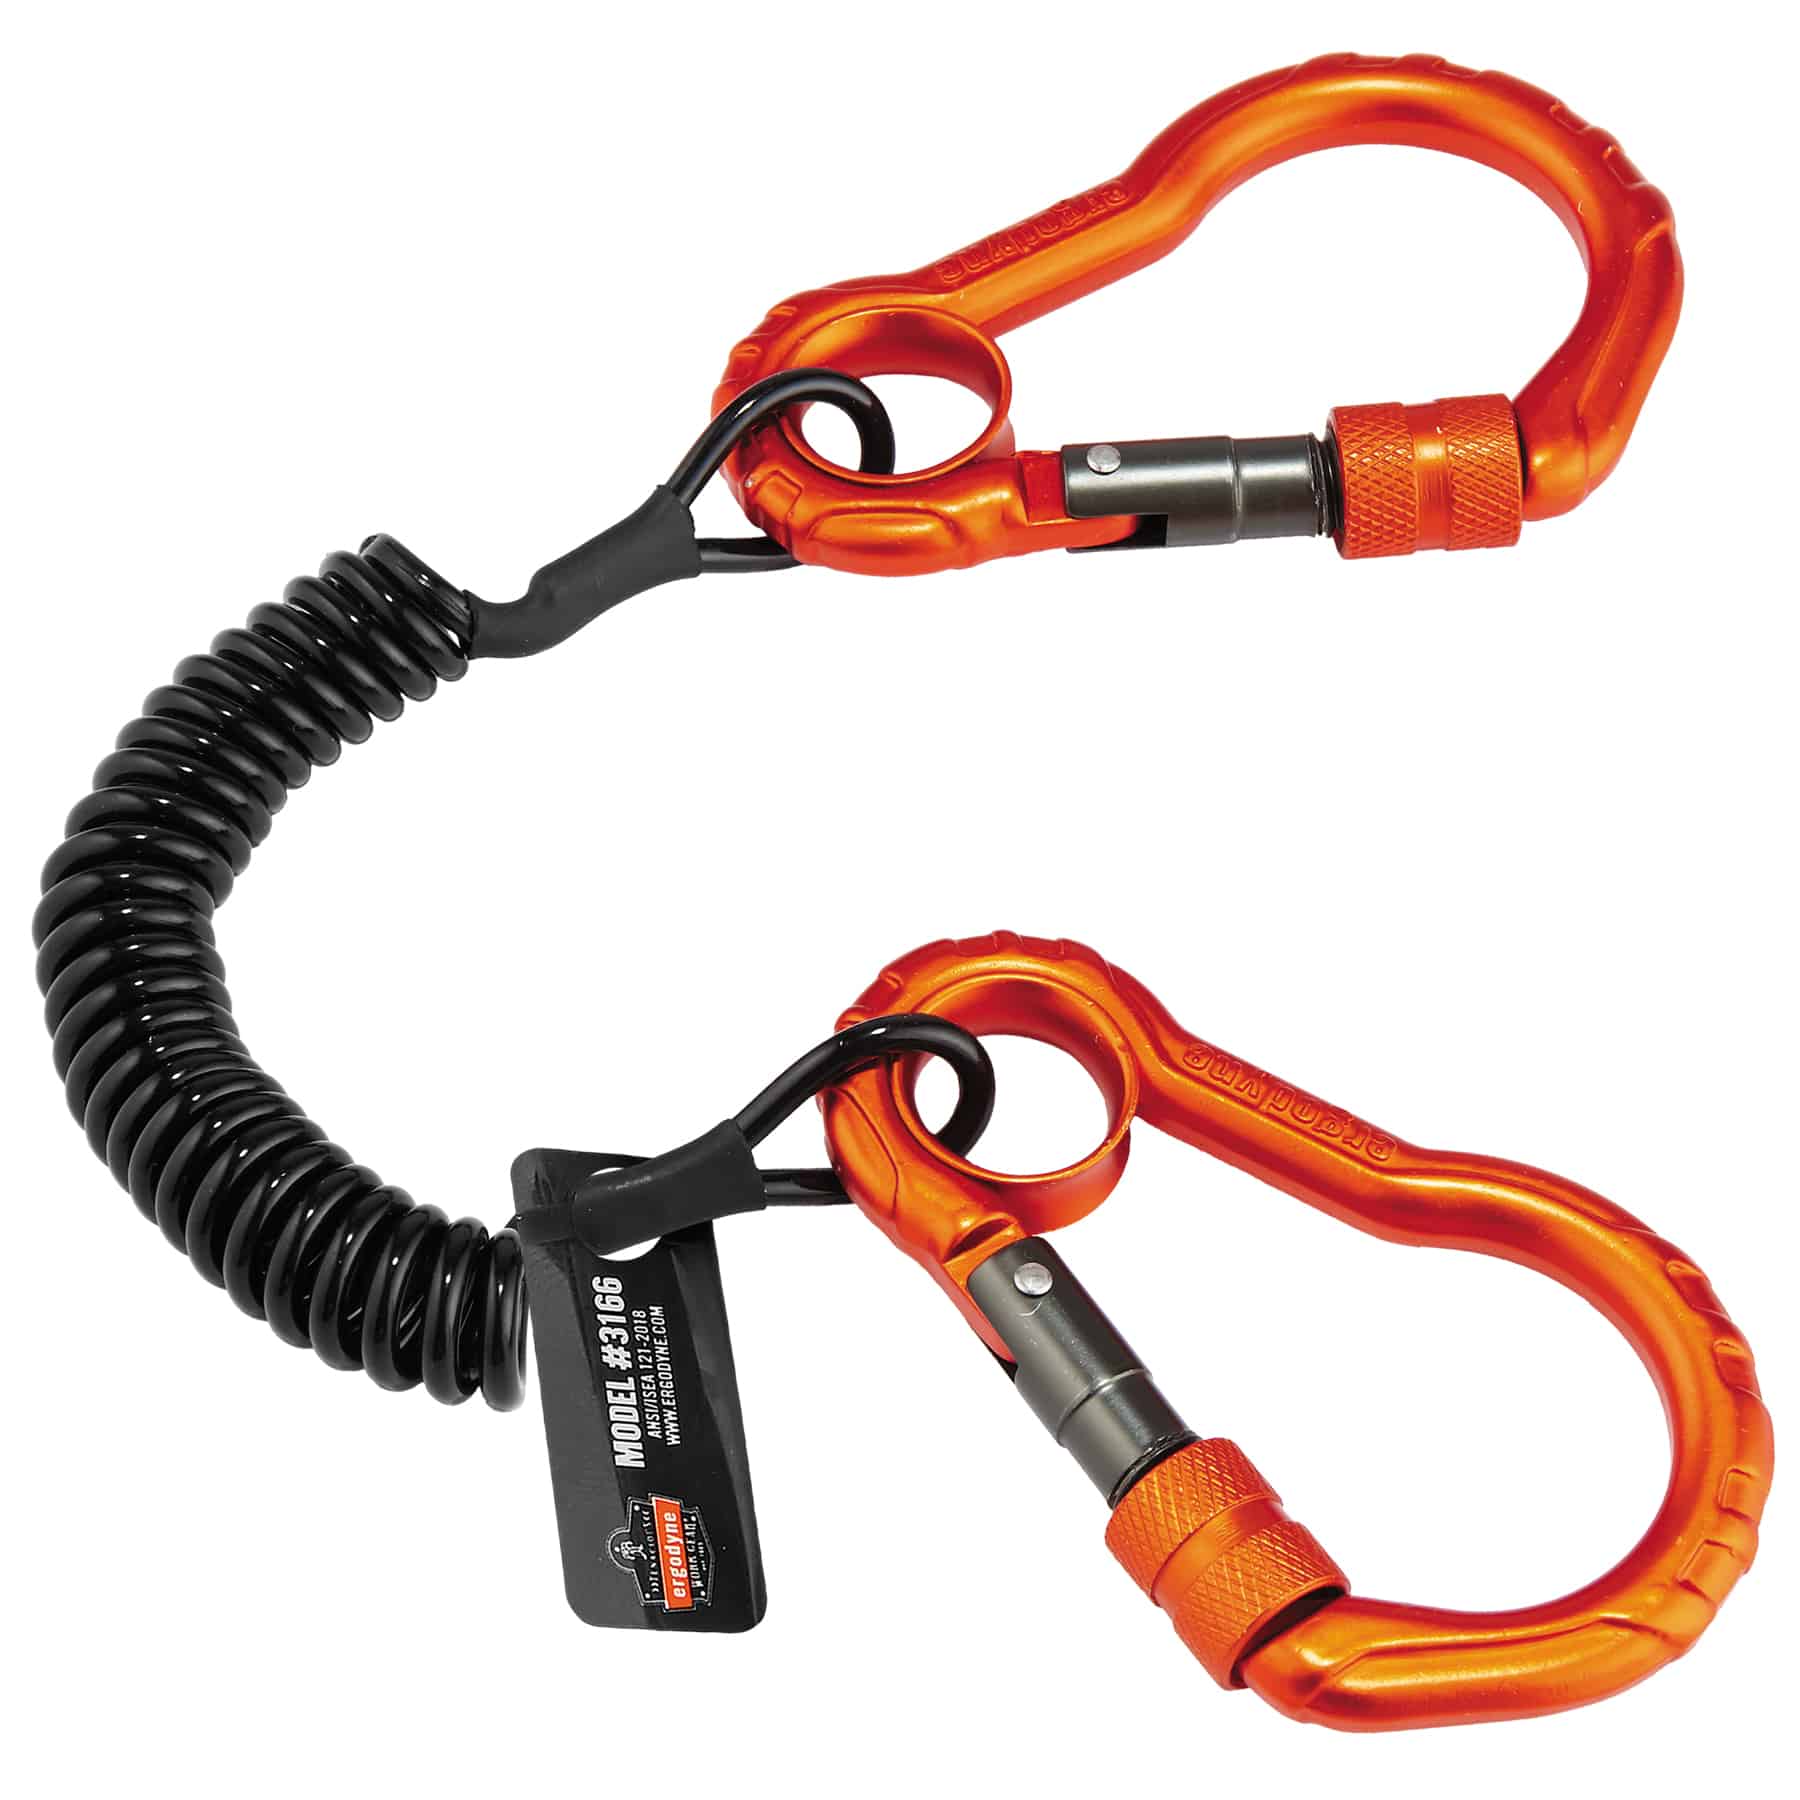 Squids 3166 Coil Tool Lanyard with Dual Carabiners - 2lbs / 0.9kg